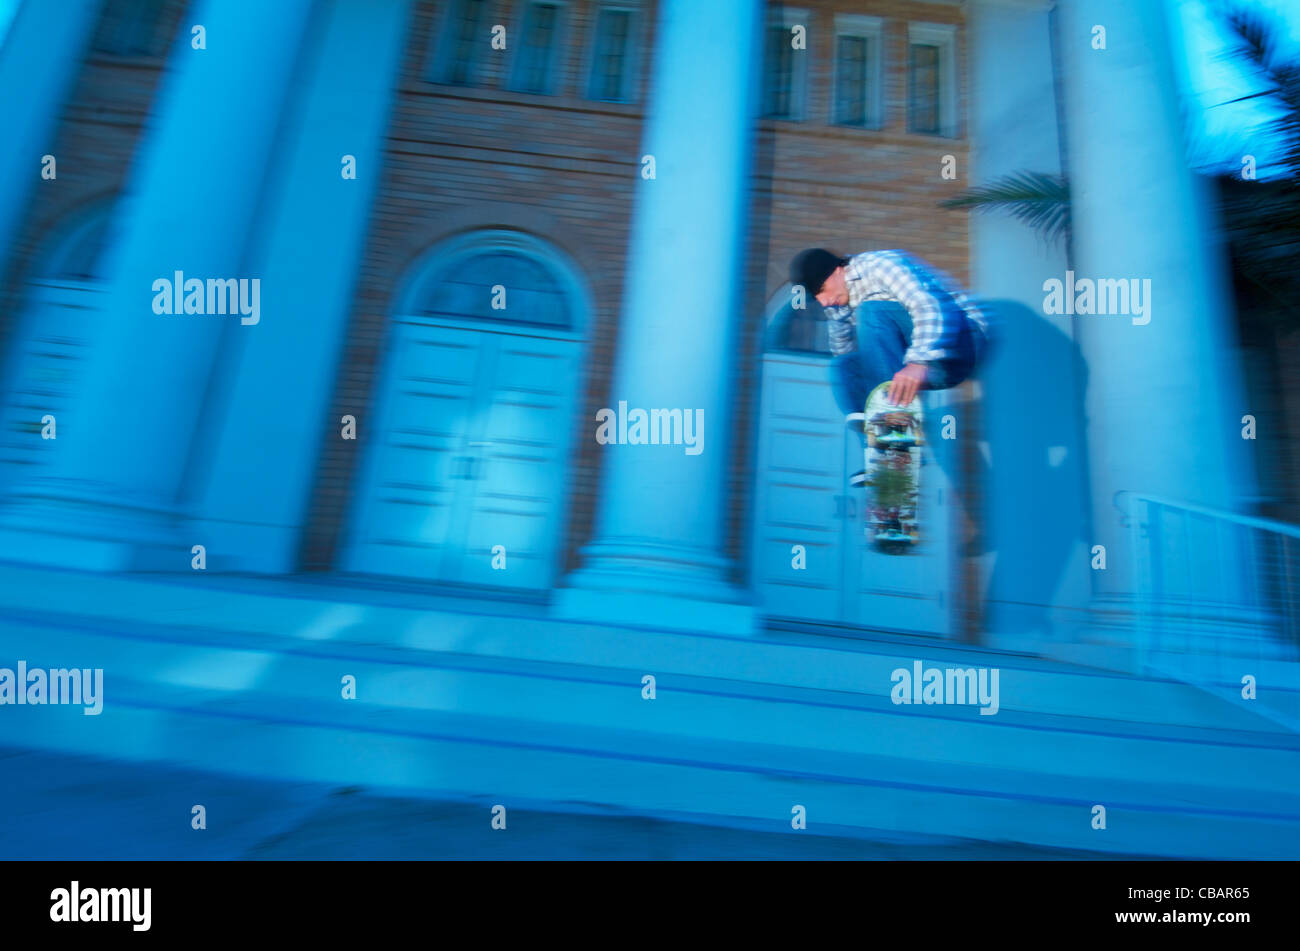 A male skateboarder jumping near stairs in an urban city setting. Stock Photo